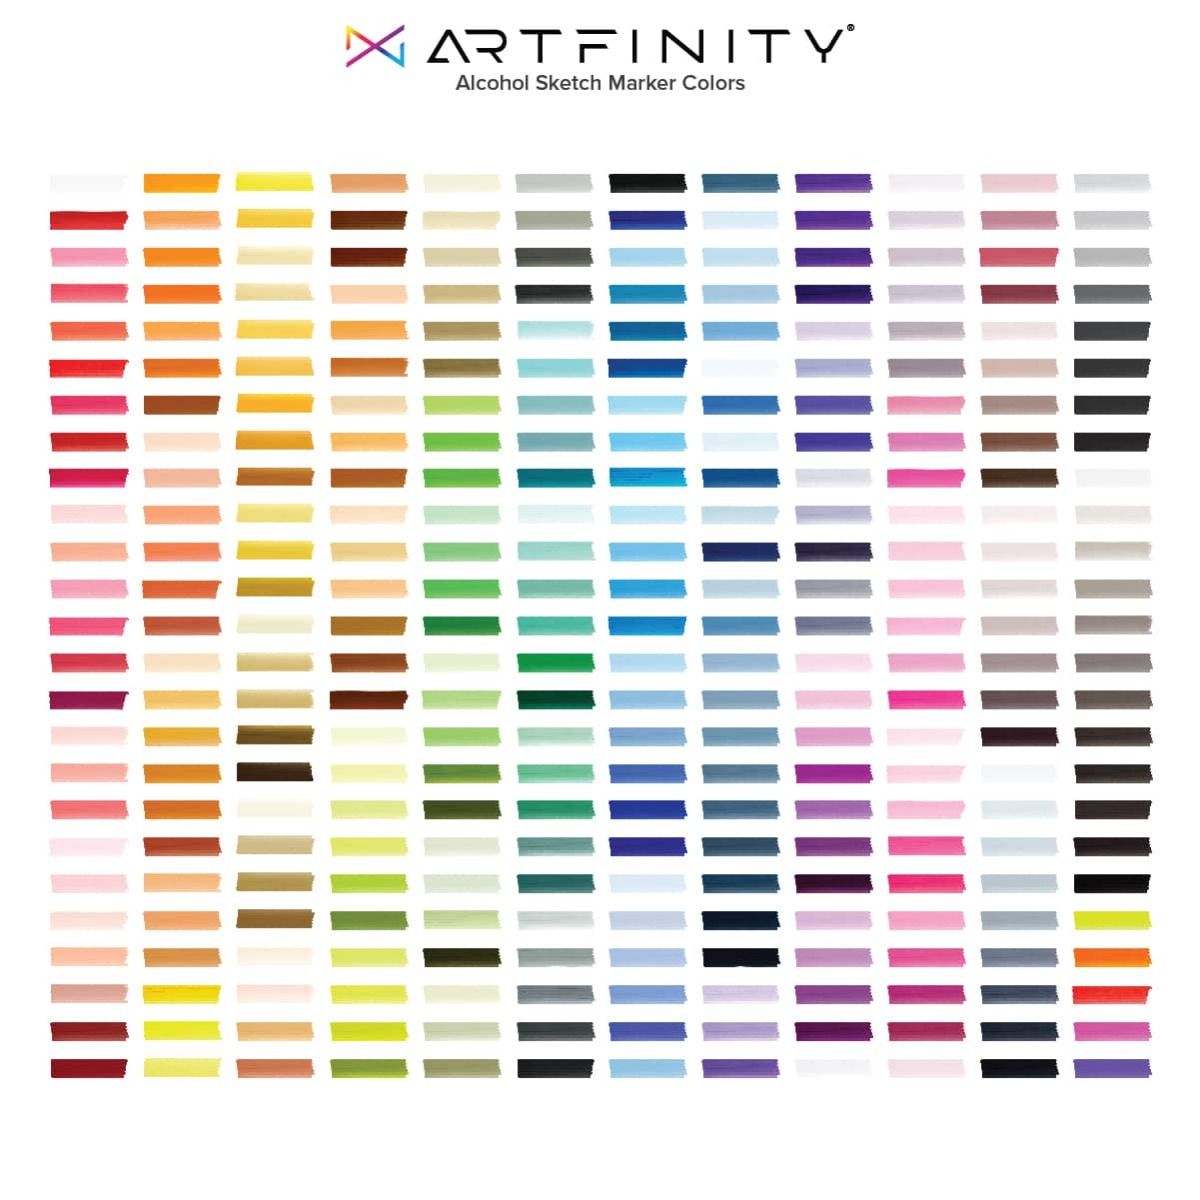 Artfinity Sketch Marker Sets - Vibrant, Professional, Dye-Based Alcohol Markers for Artists, Drawing, Students, Travel, & More! - [Flagstone Red Rv6-4